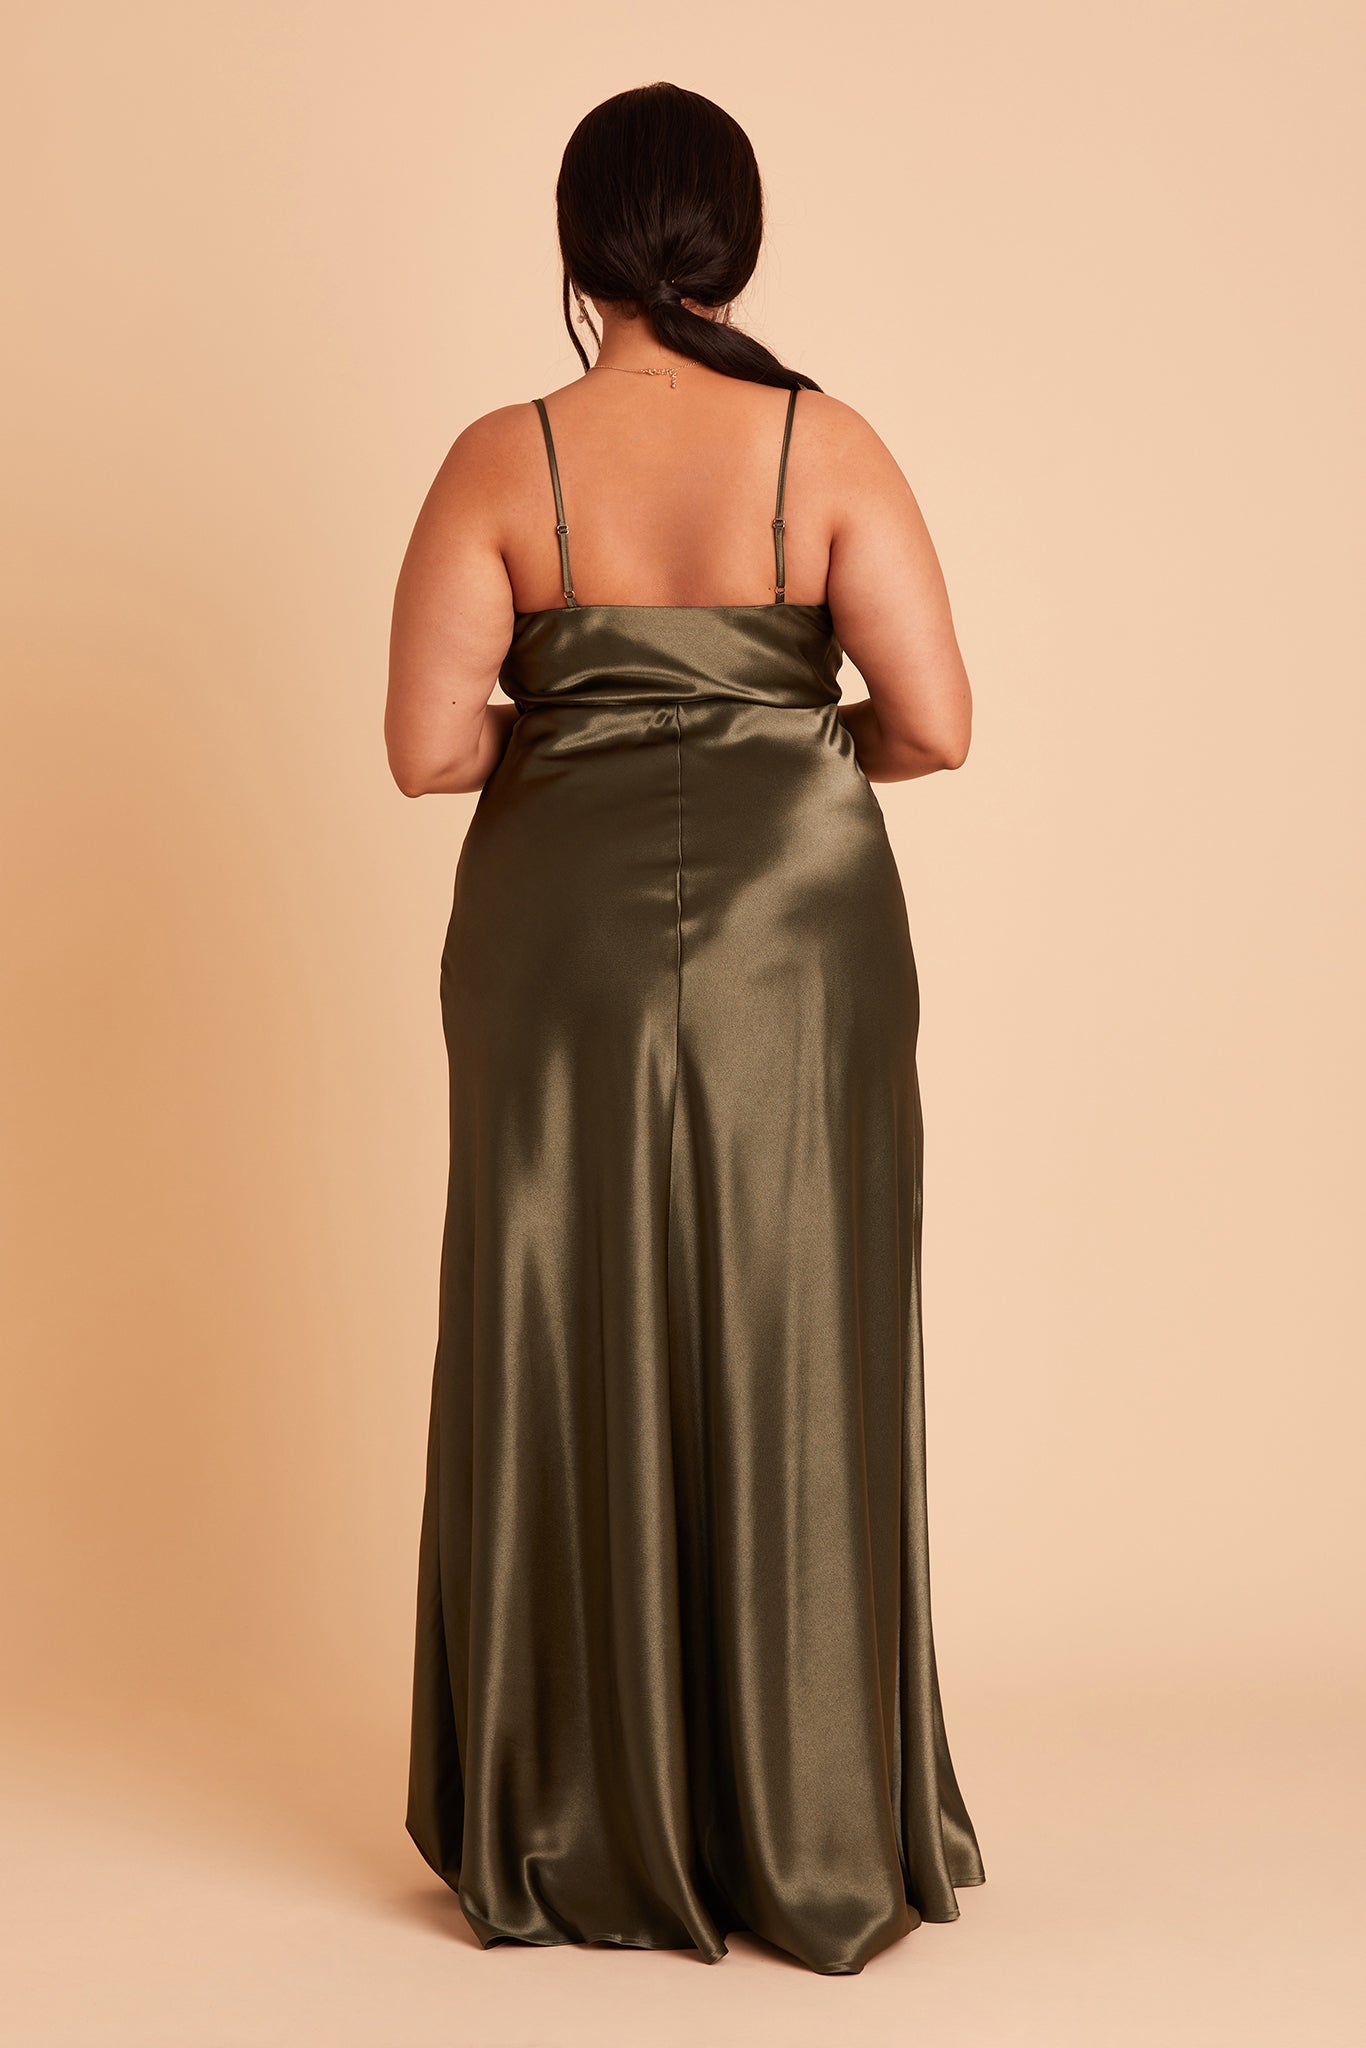 Back view of the Lisa Long Dress Curve in olive satin shows the back of the dress with adjustable spaghetti straps and a smooth fit in the bodice and waist that attach to a full length skirt.  